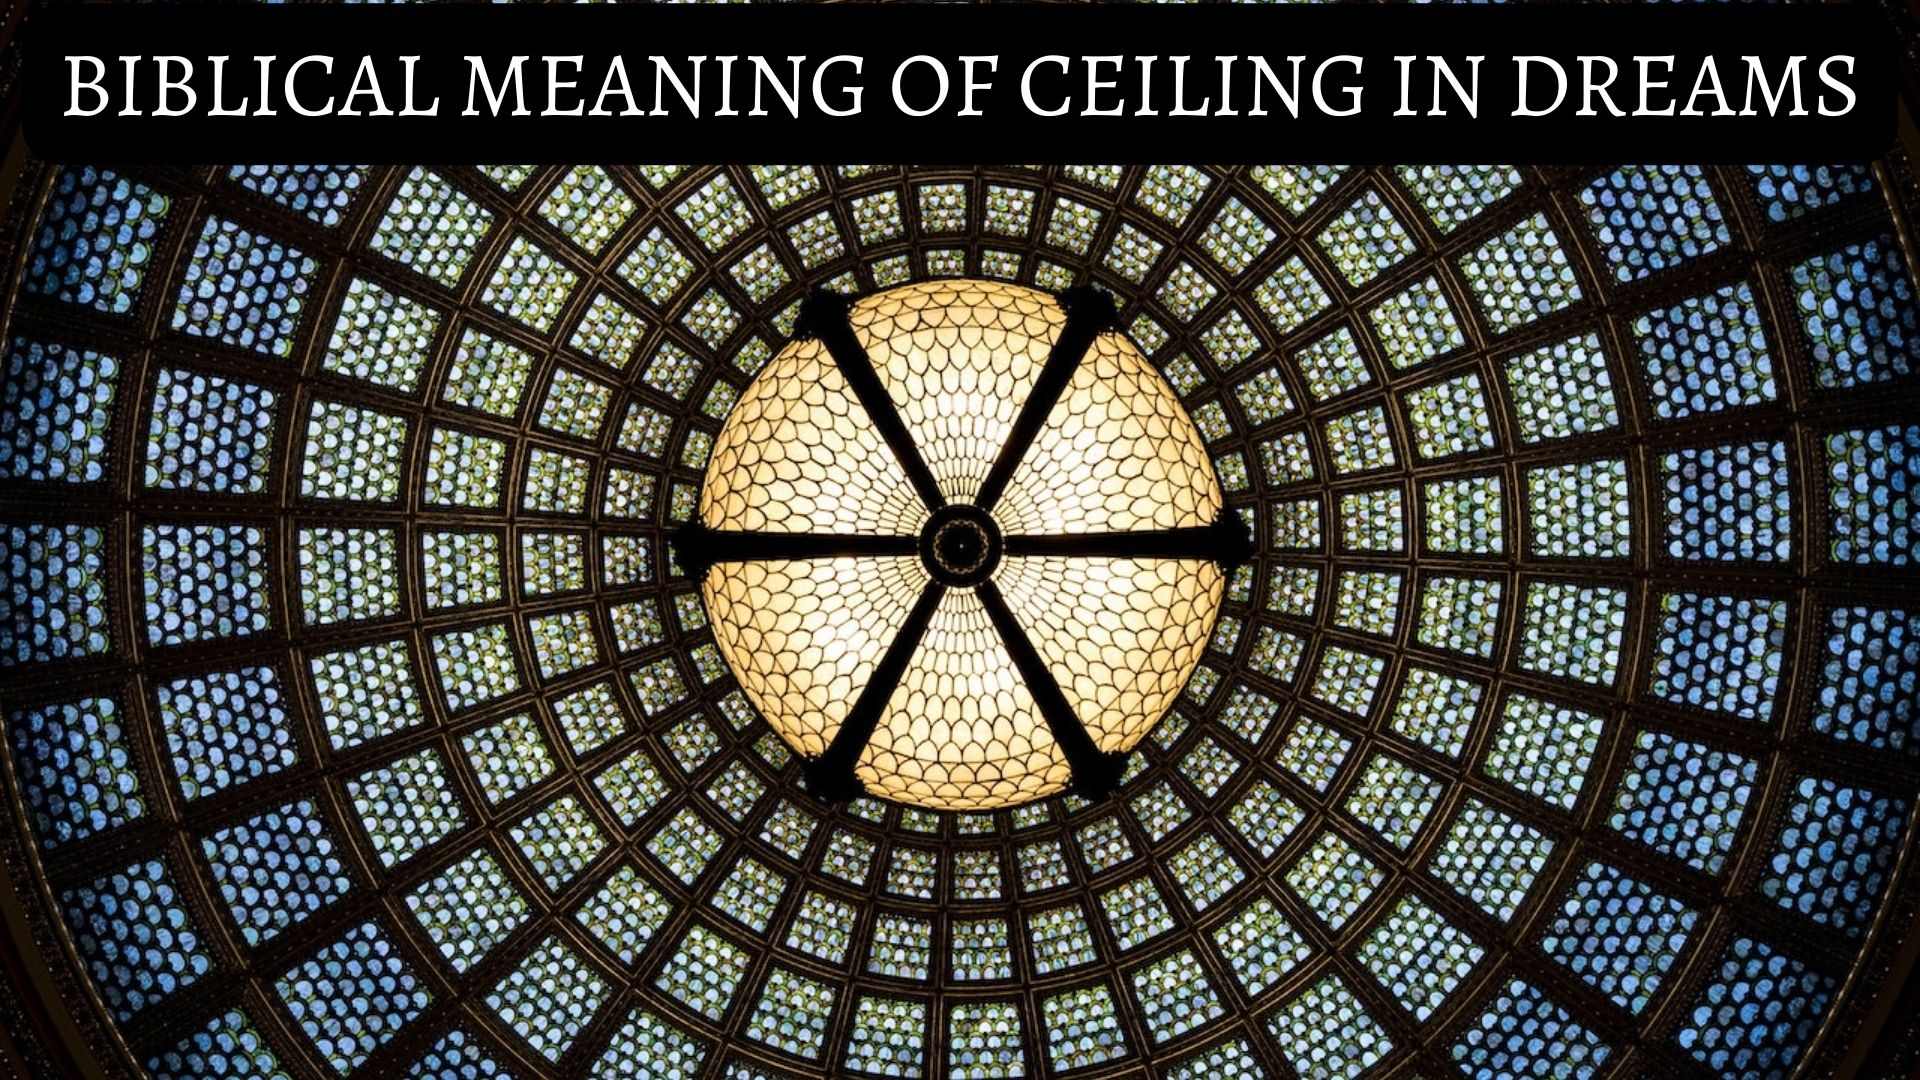 Biblical Meaning Of Ceiling In Dreams Represents Waiting Or Confinement